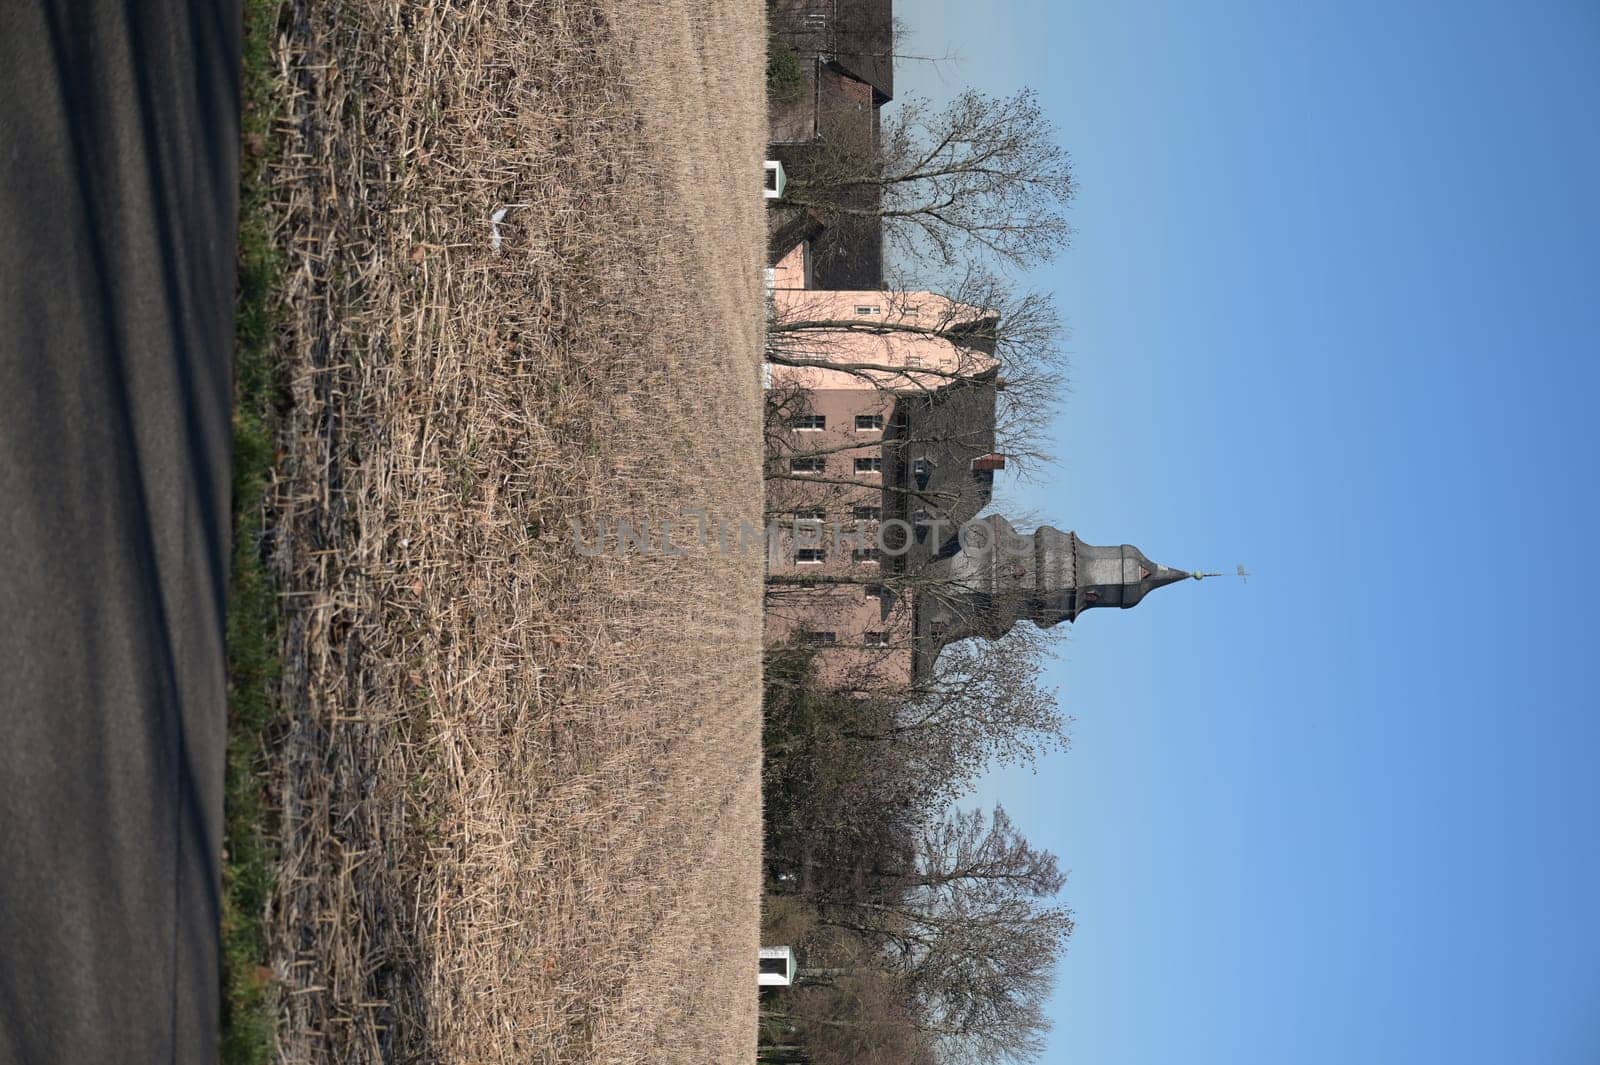 Old manor house with slate tower called Gut Dyckhof in Meerbusch, Germany